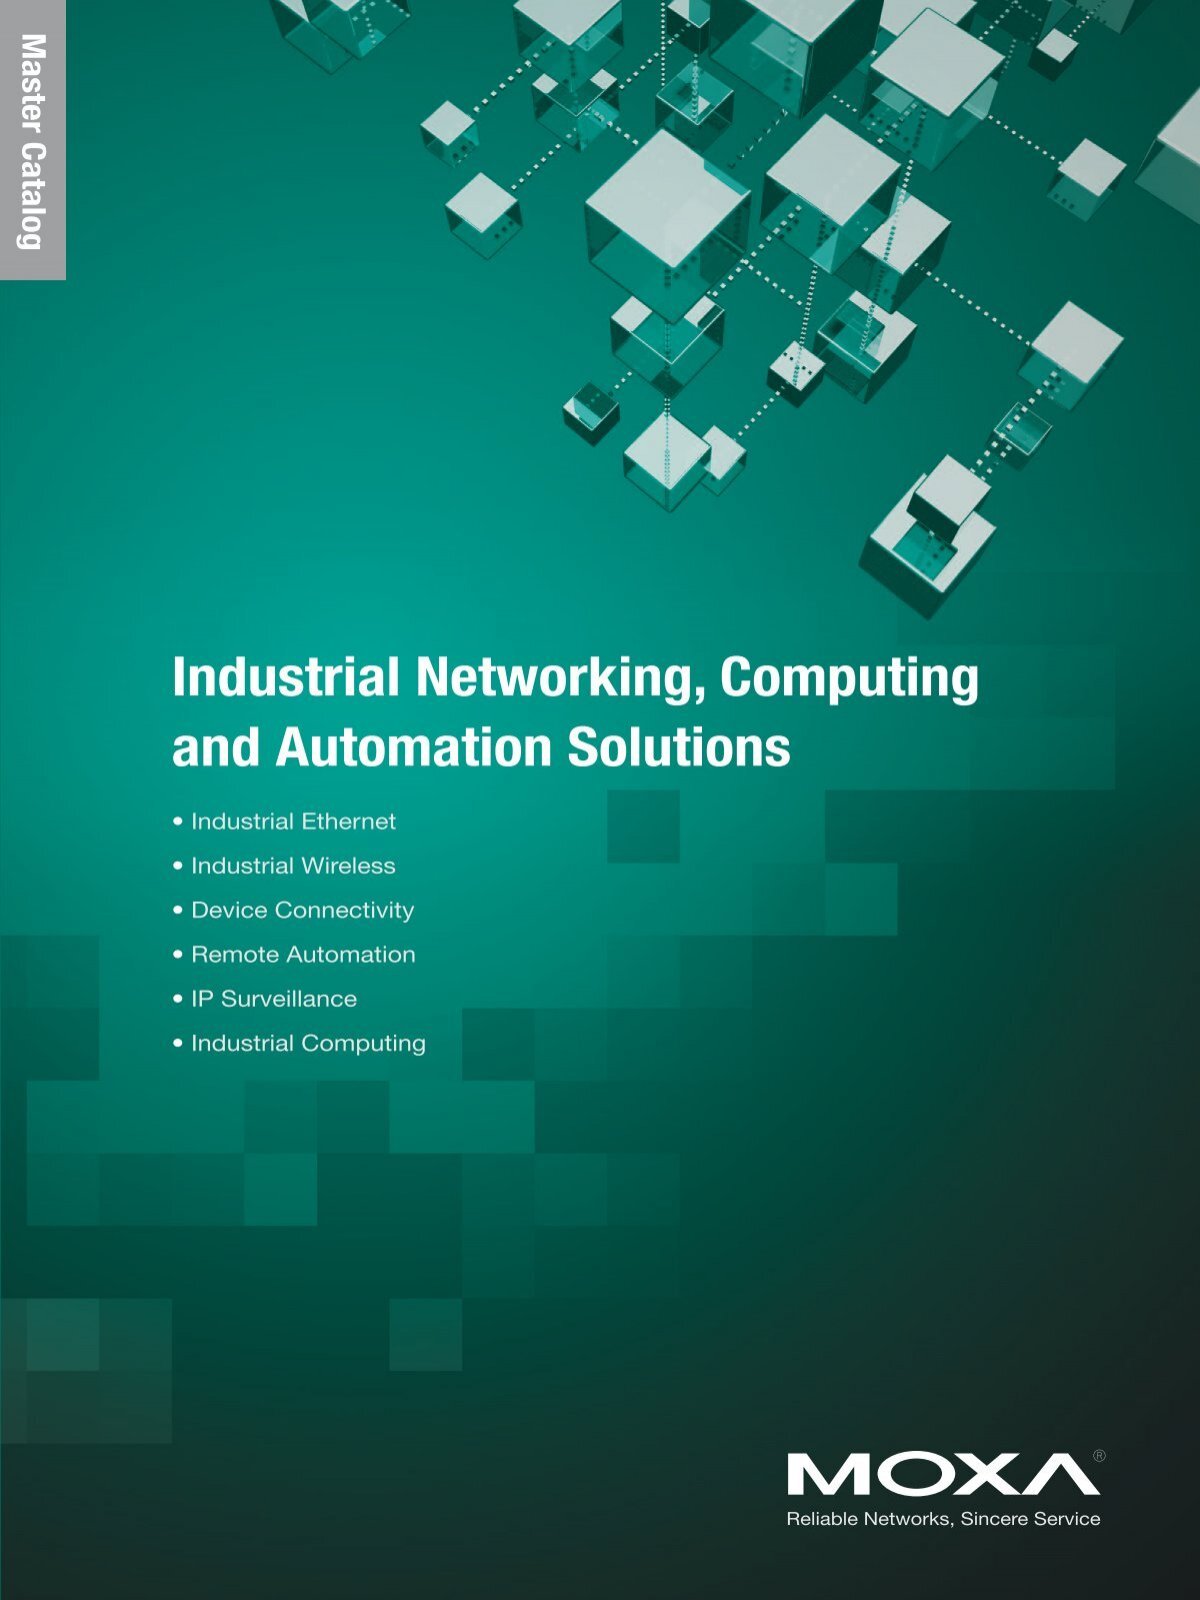 Industrial Networking, Computing and Automation Solutions